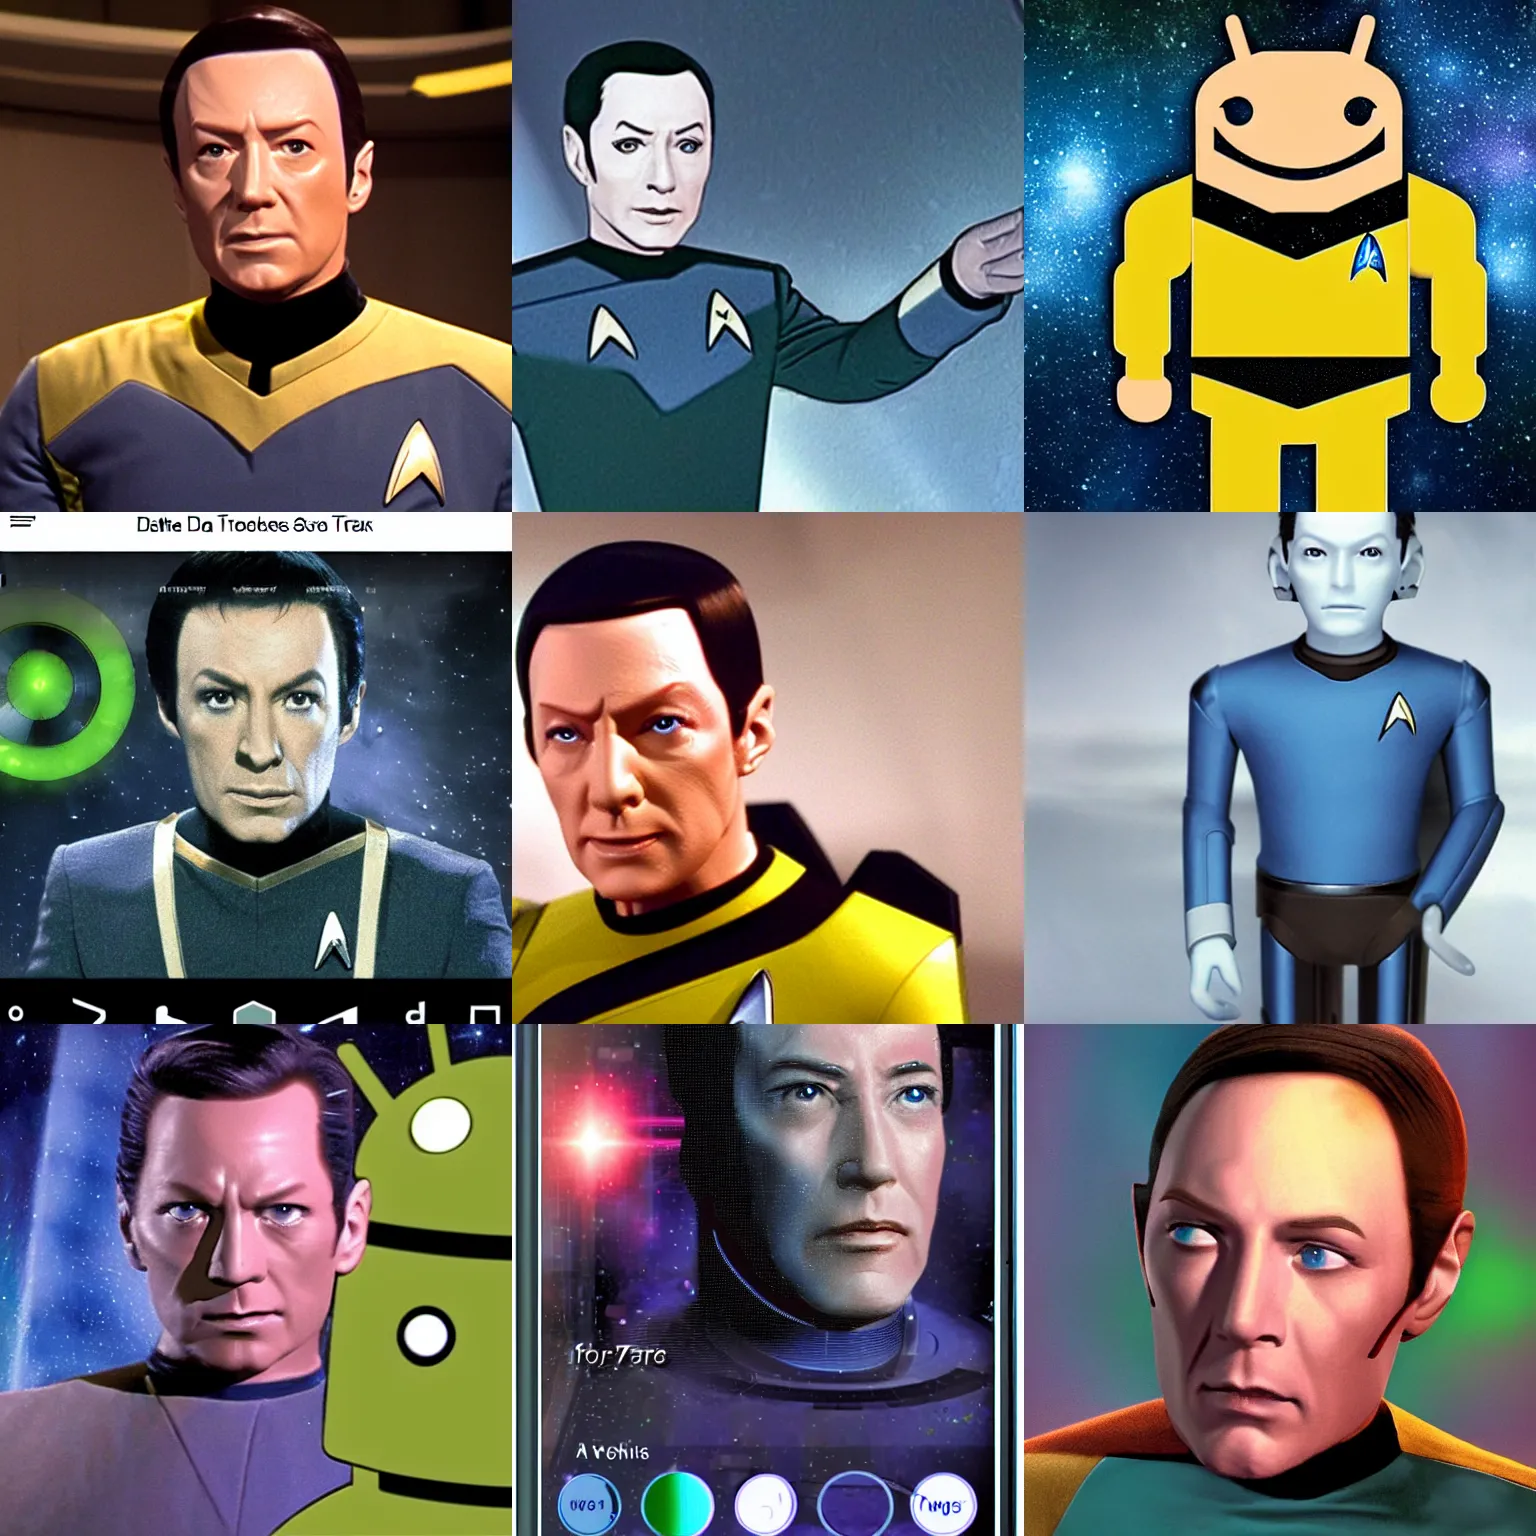 Prompt: Data the star trek android